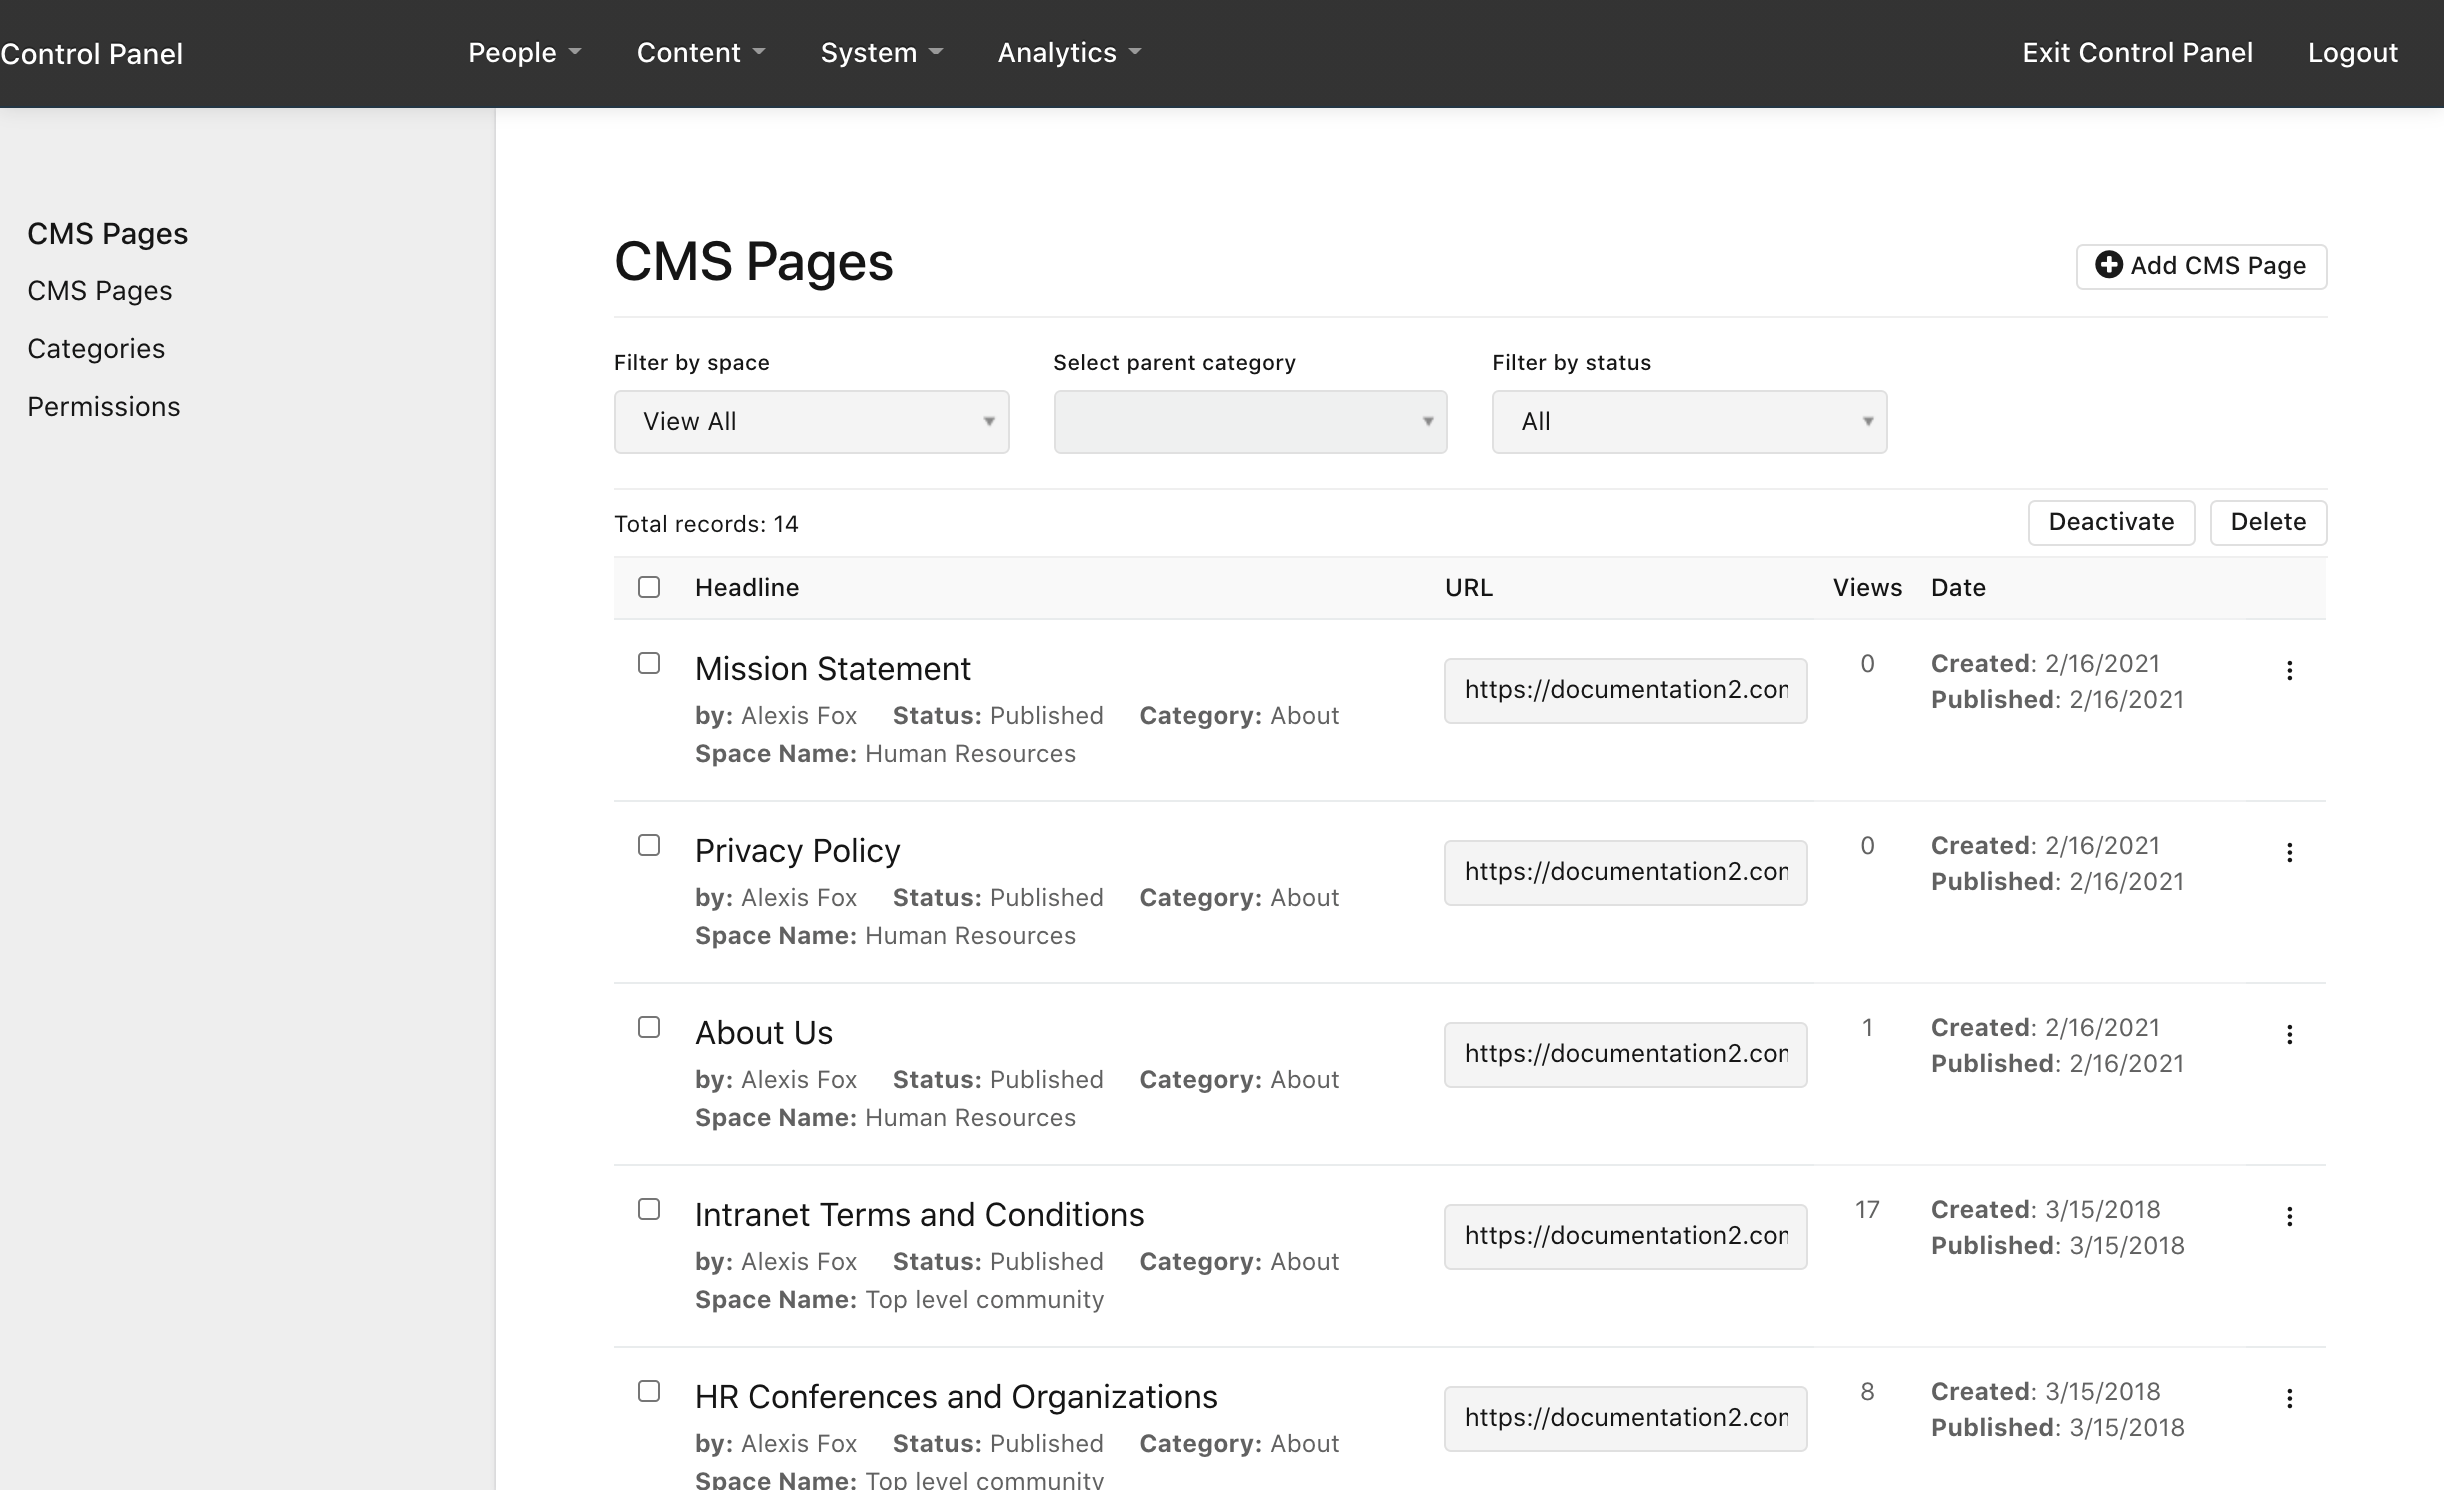 Control Panel > Content > CMS Pages